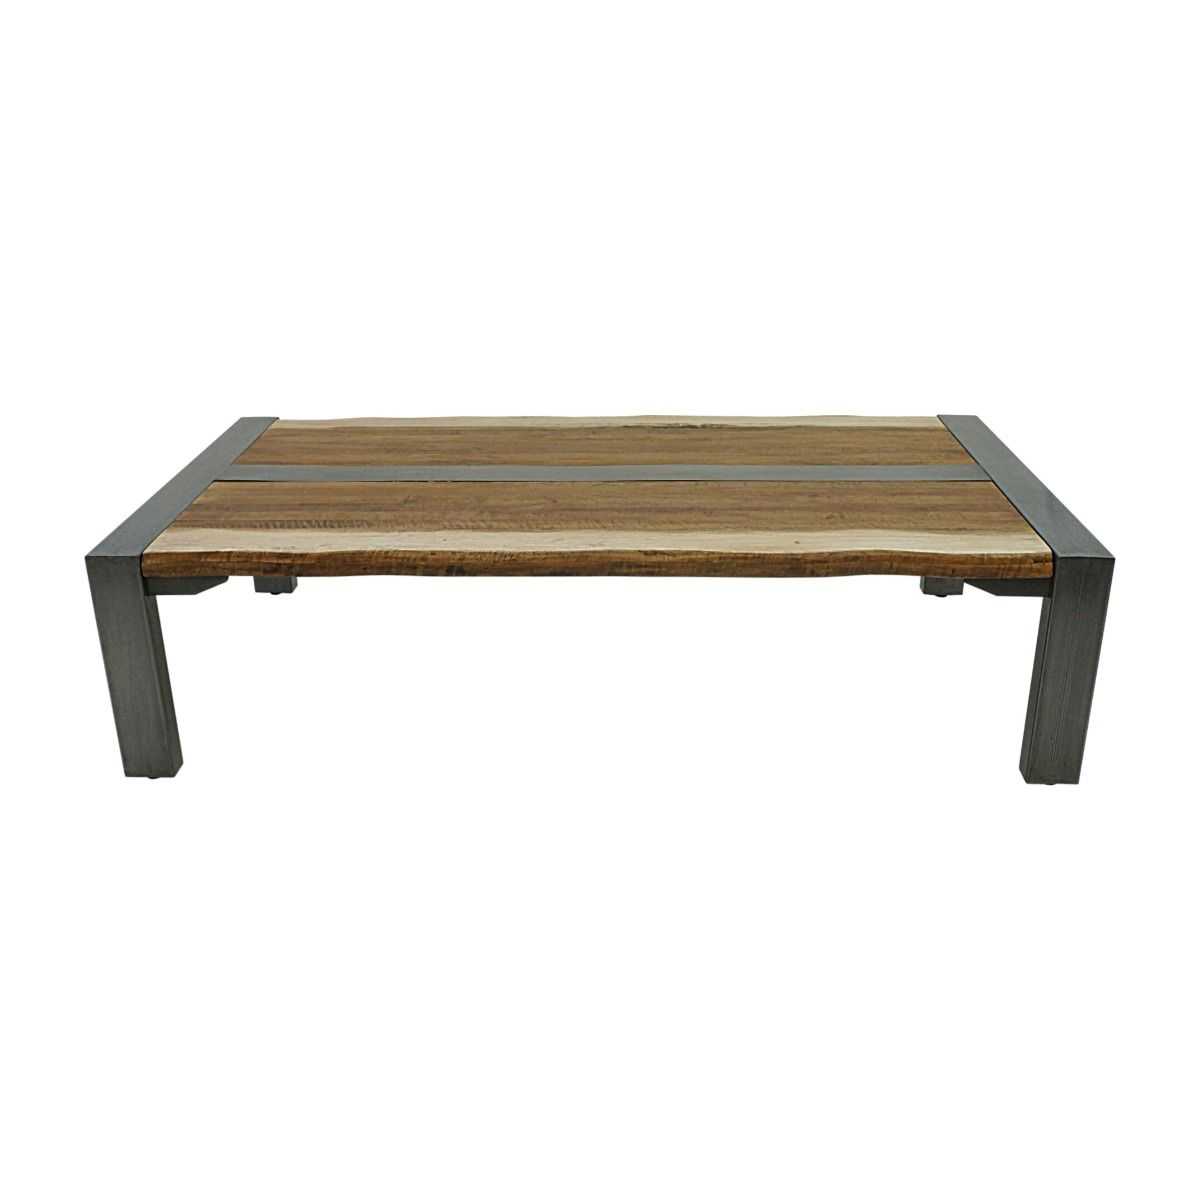 CR Foundry Timber Top with Steel Legs Coffee Table